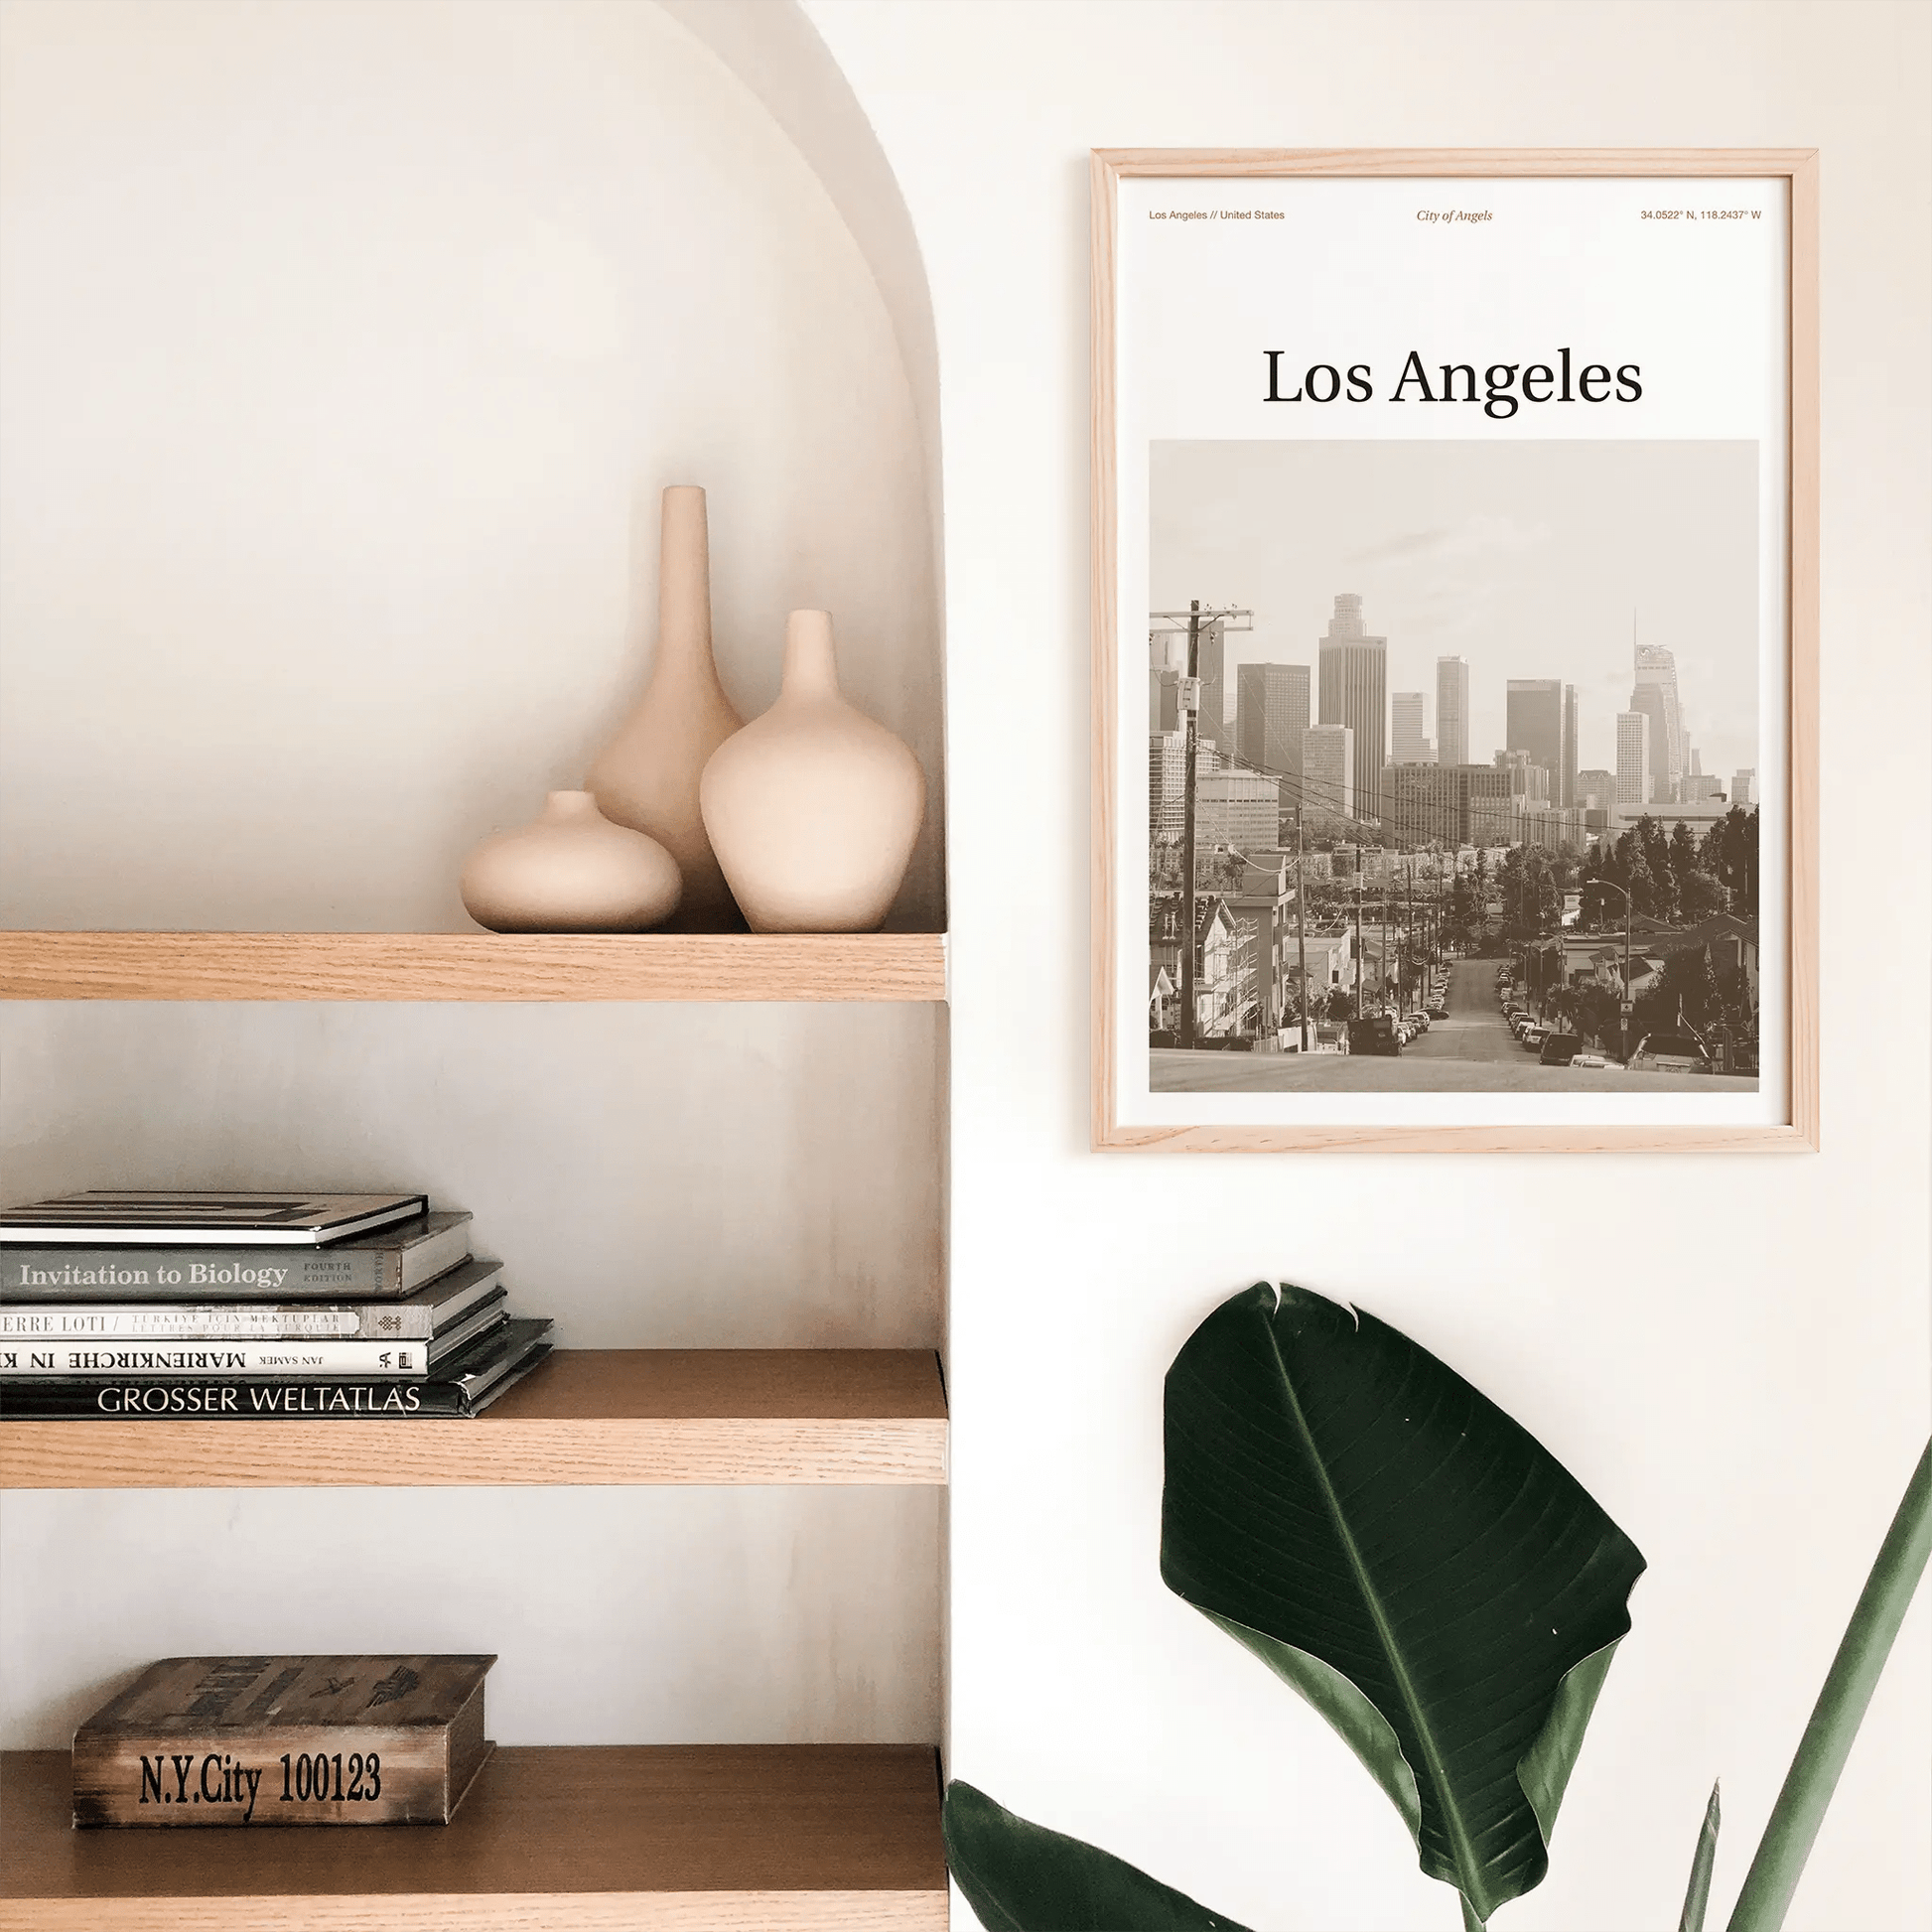 Los Angeles Essence Poster - The Globe Gallery